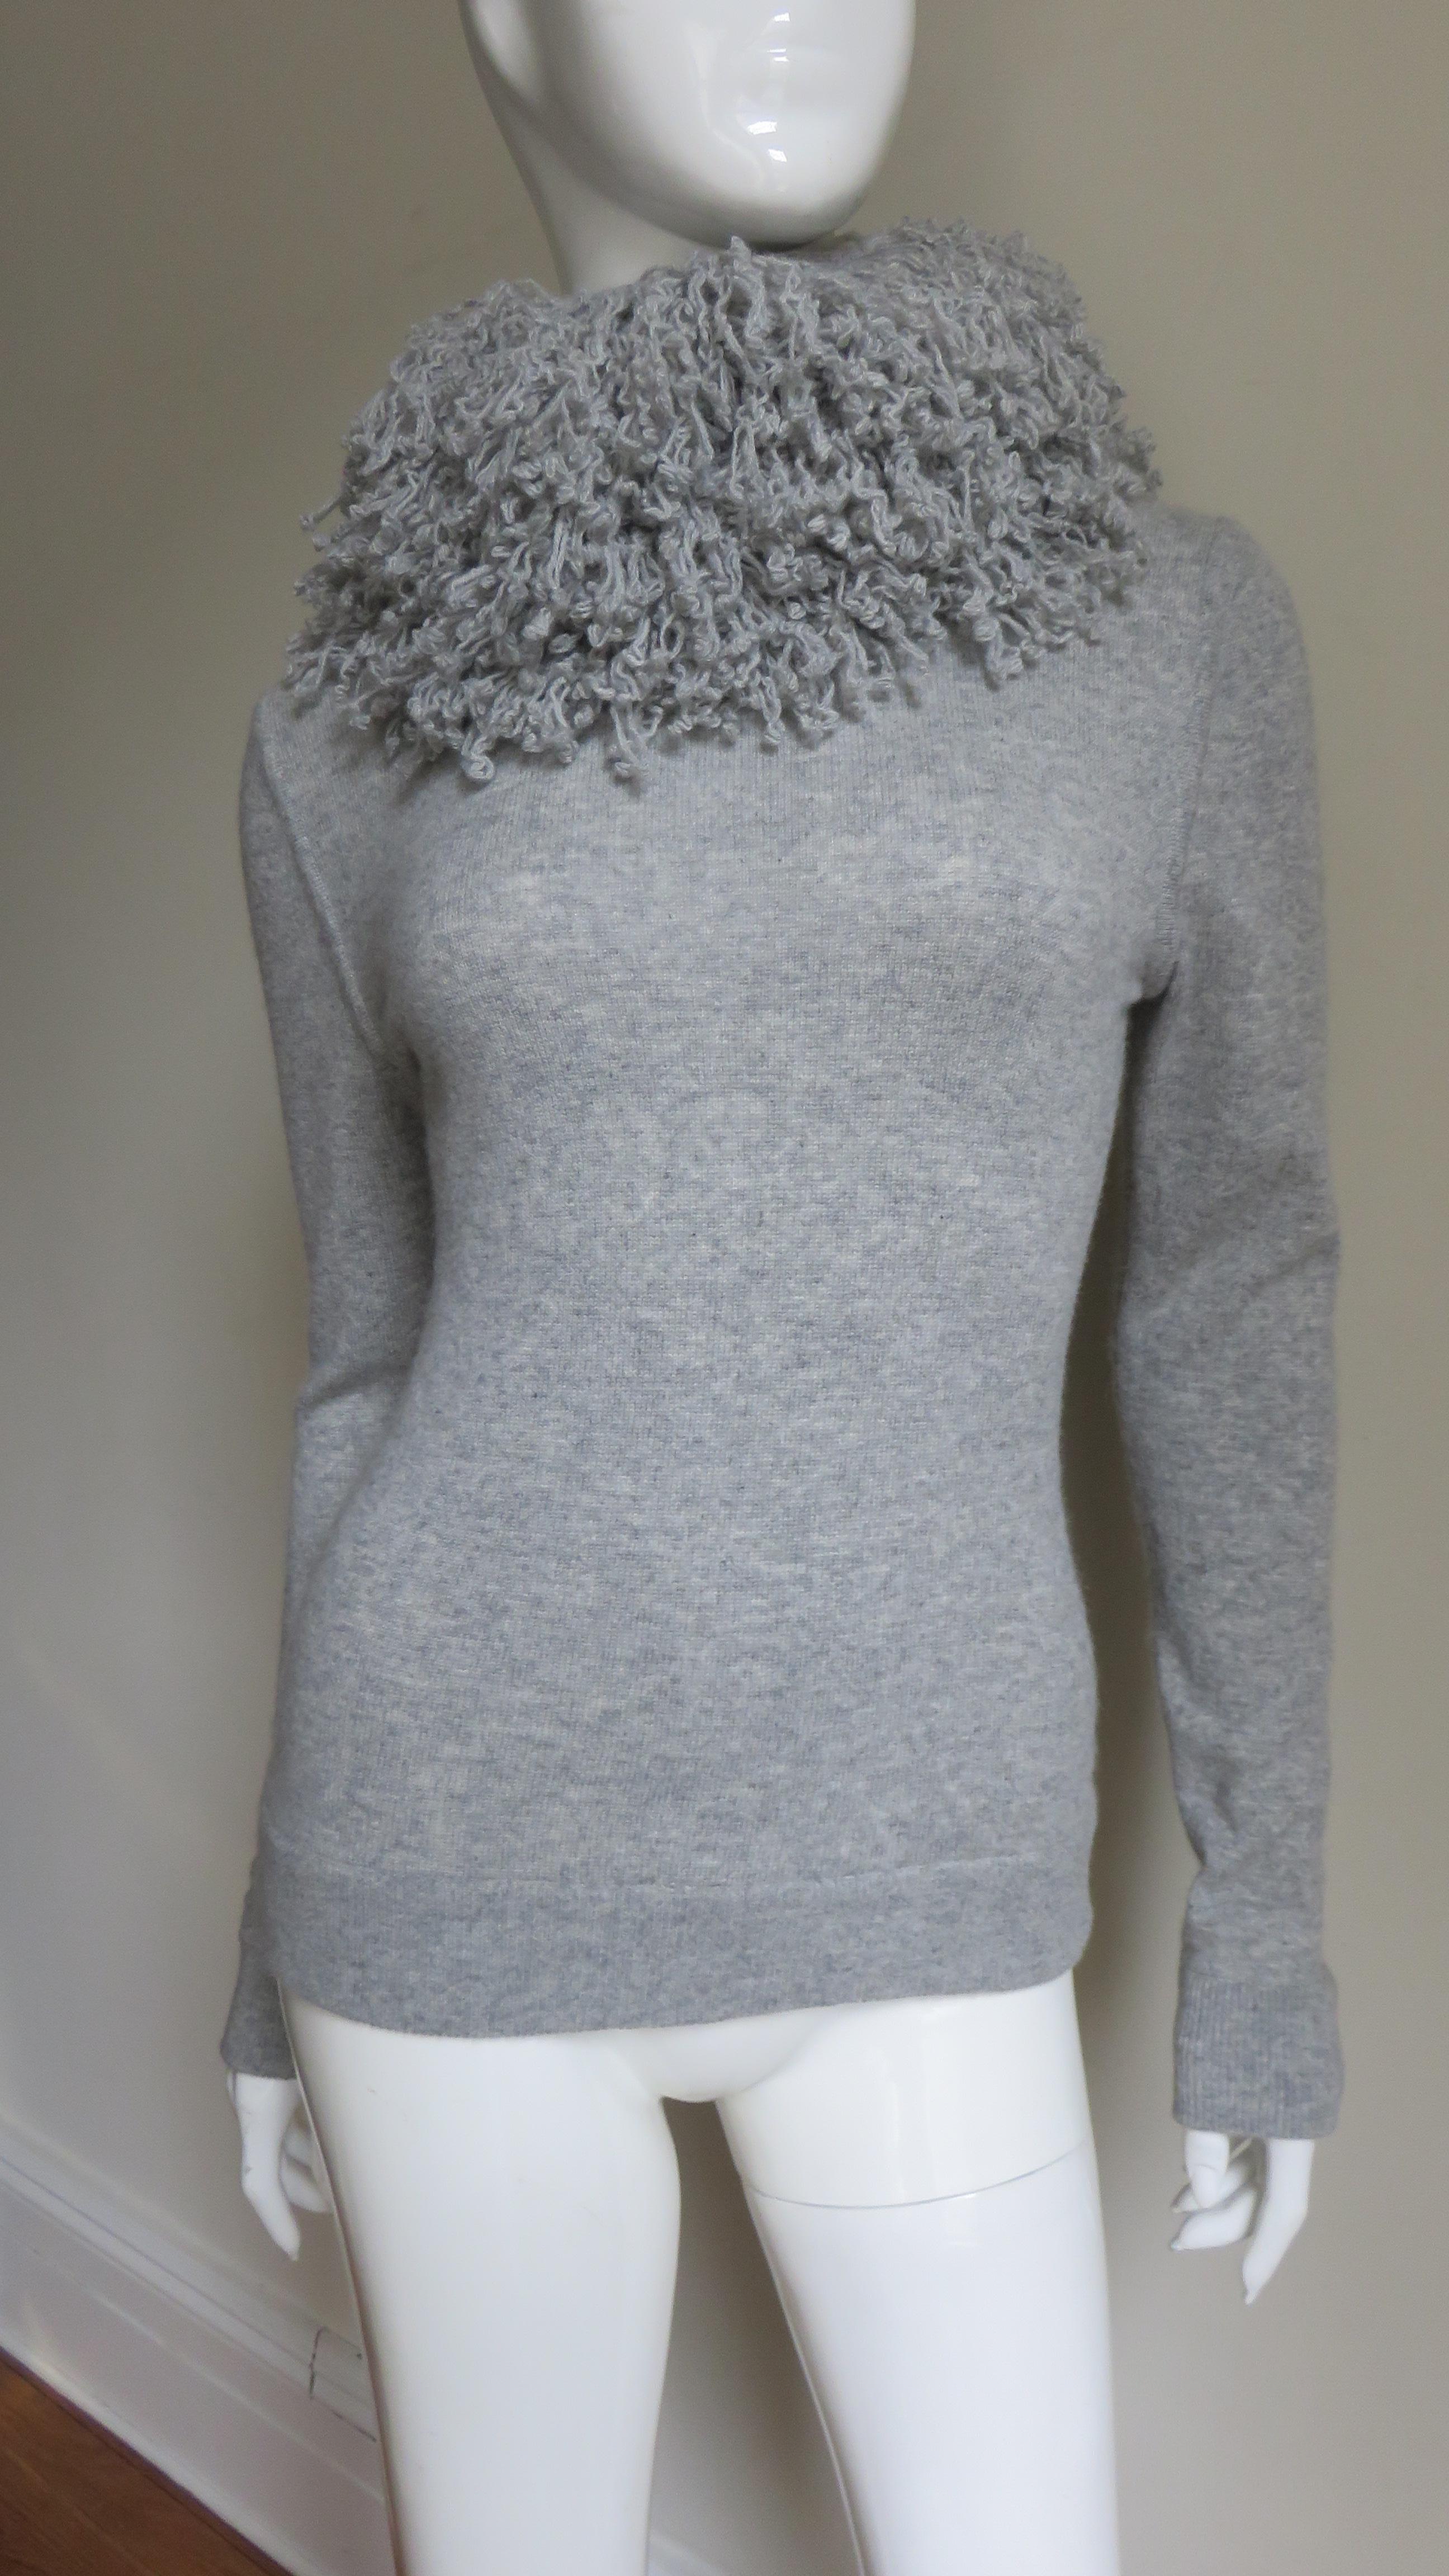 A fabulous grey fine cashmere sweater by Laura Biagiotti.  It is semi fitted with long sleeves and a stand up collar comprised of coils of the sweater yarn.   It closes at the back collar with matching mother of pearl buttons and loops and has